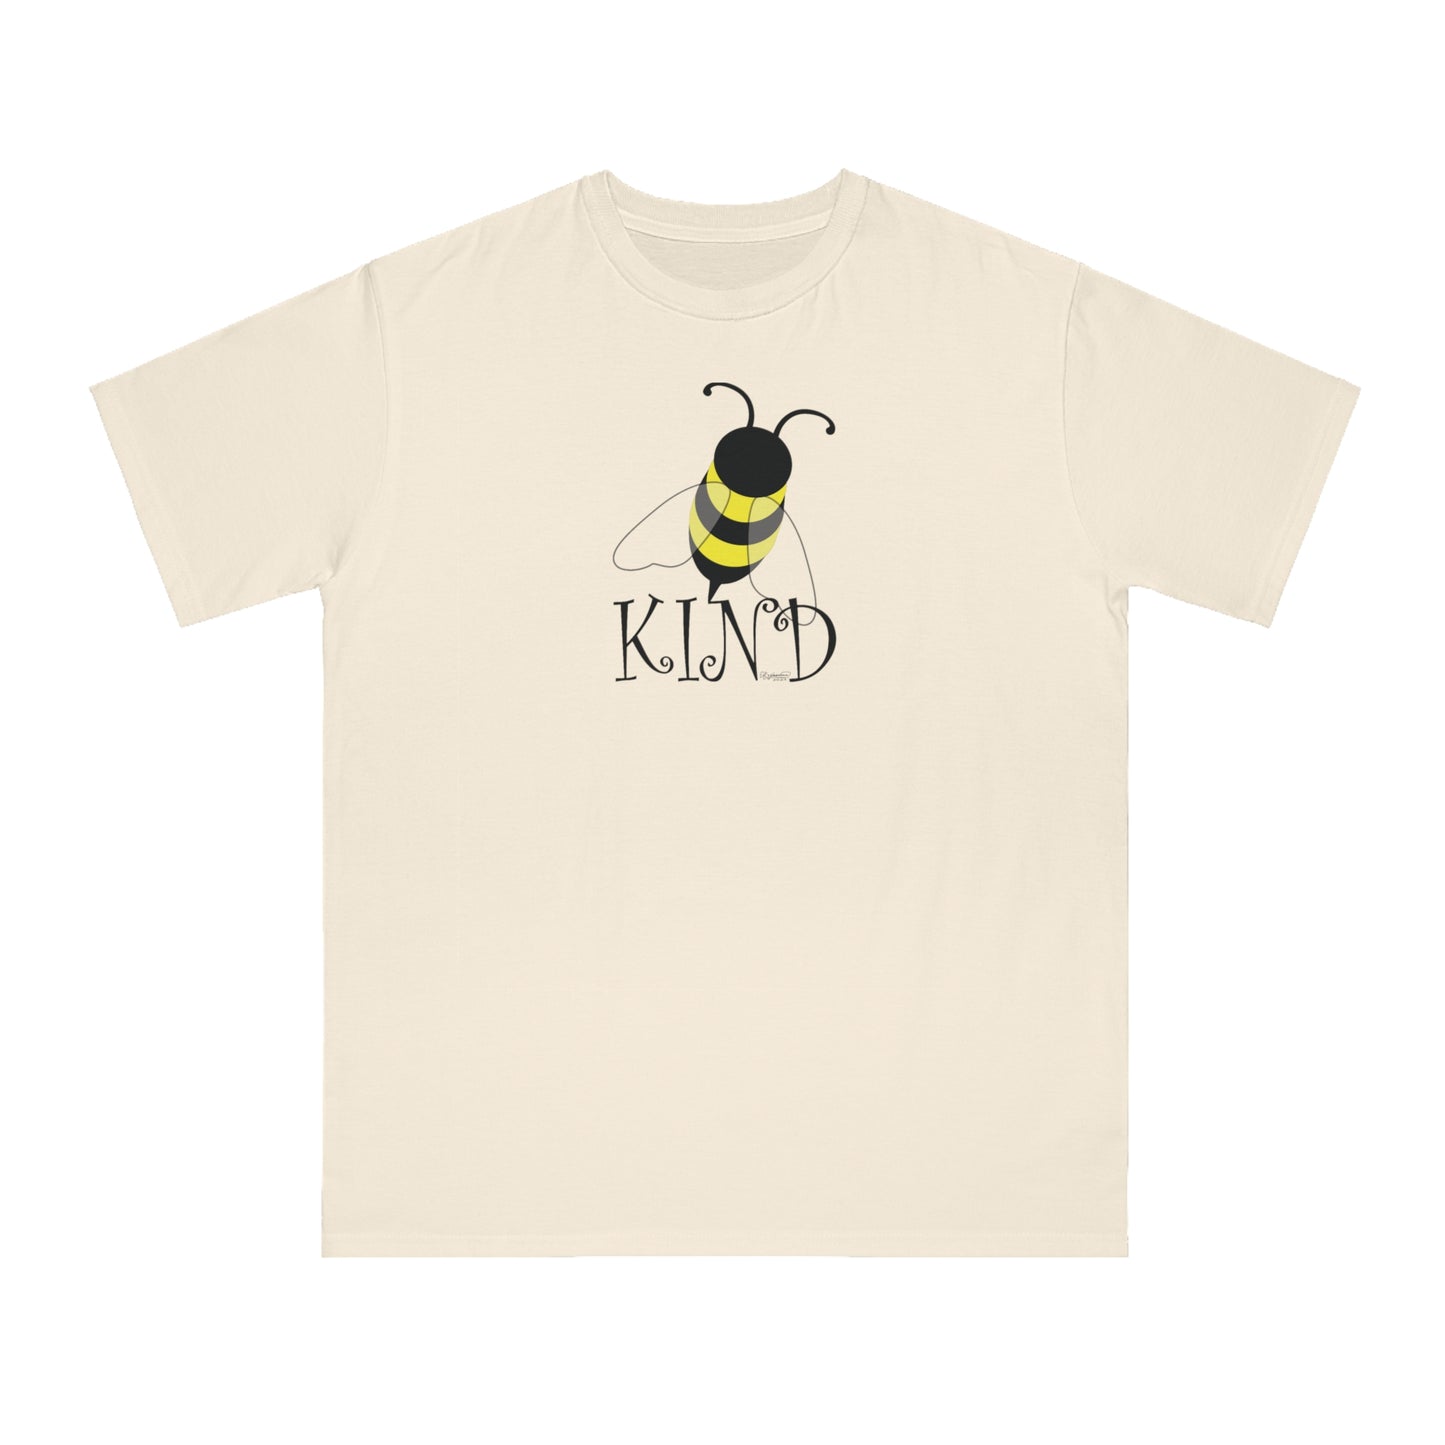 Bee Kind: The Organic Cotton Unisex Classic T-Shirt That Inspires Compassion